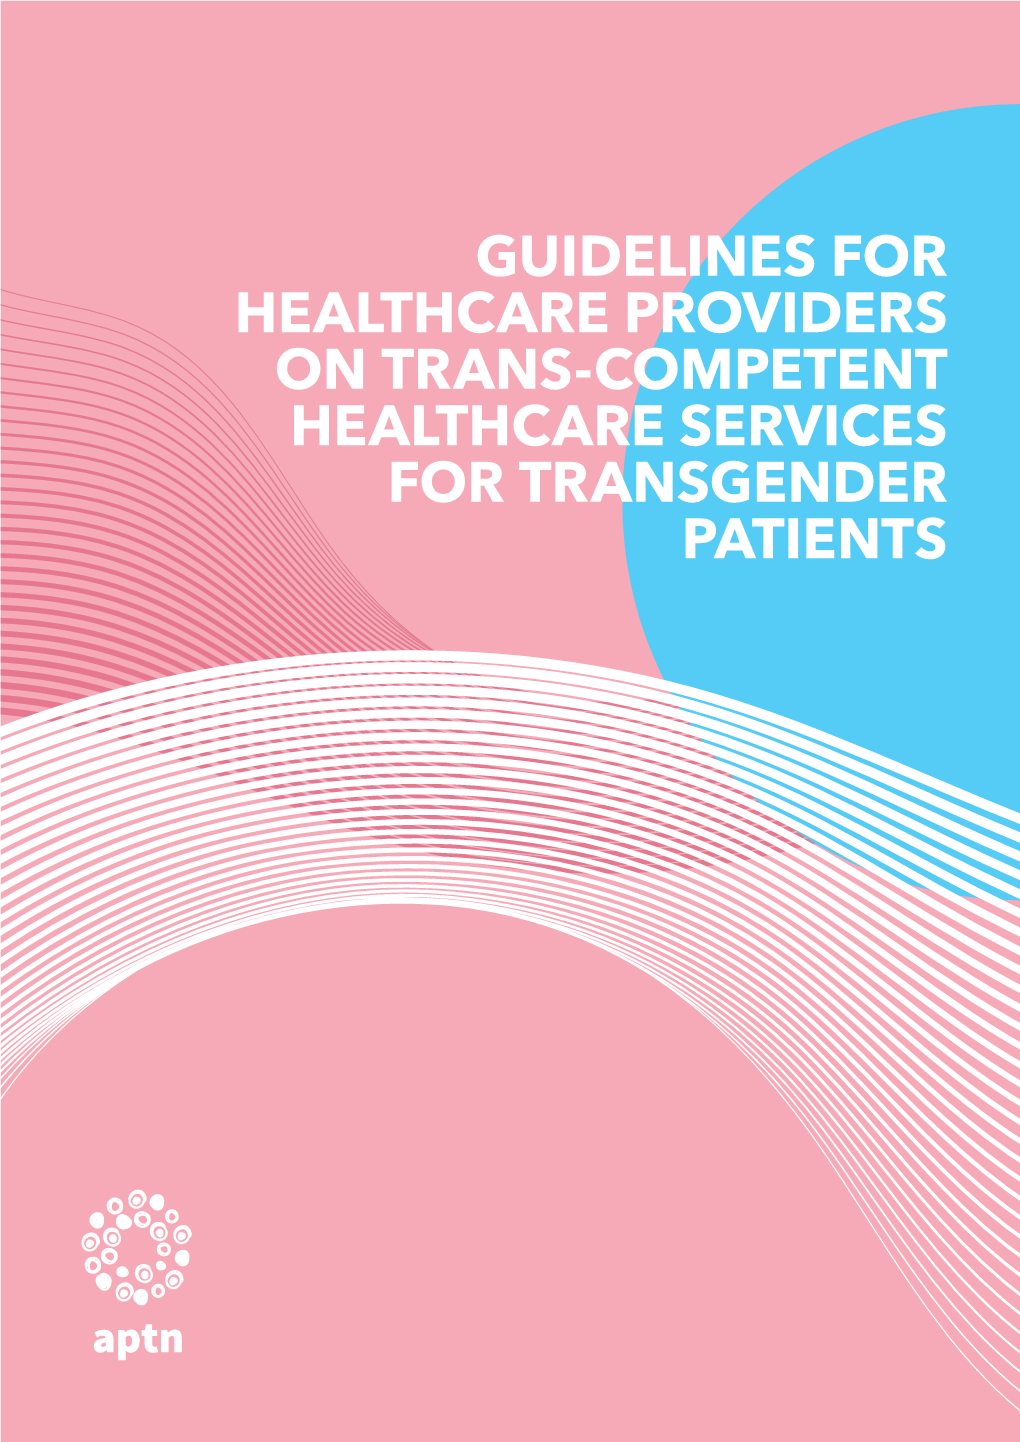 GUIDELINES for HEALTHCARE PROVIDERS on TRANS-COMPETENT HEALTHCARE SERVICES for TRANSGENDER PATIENTS Production Team